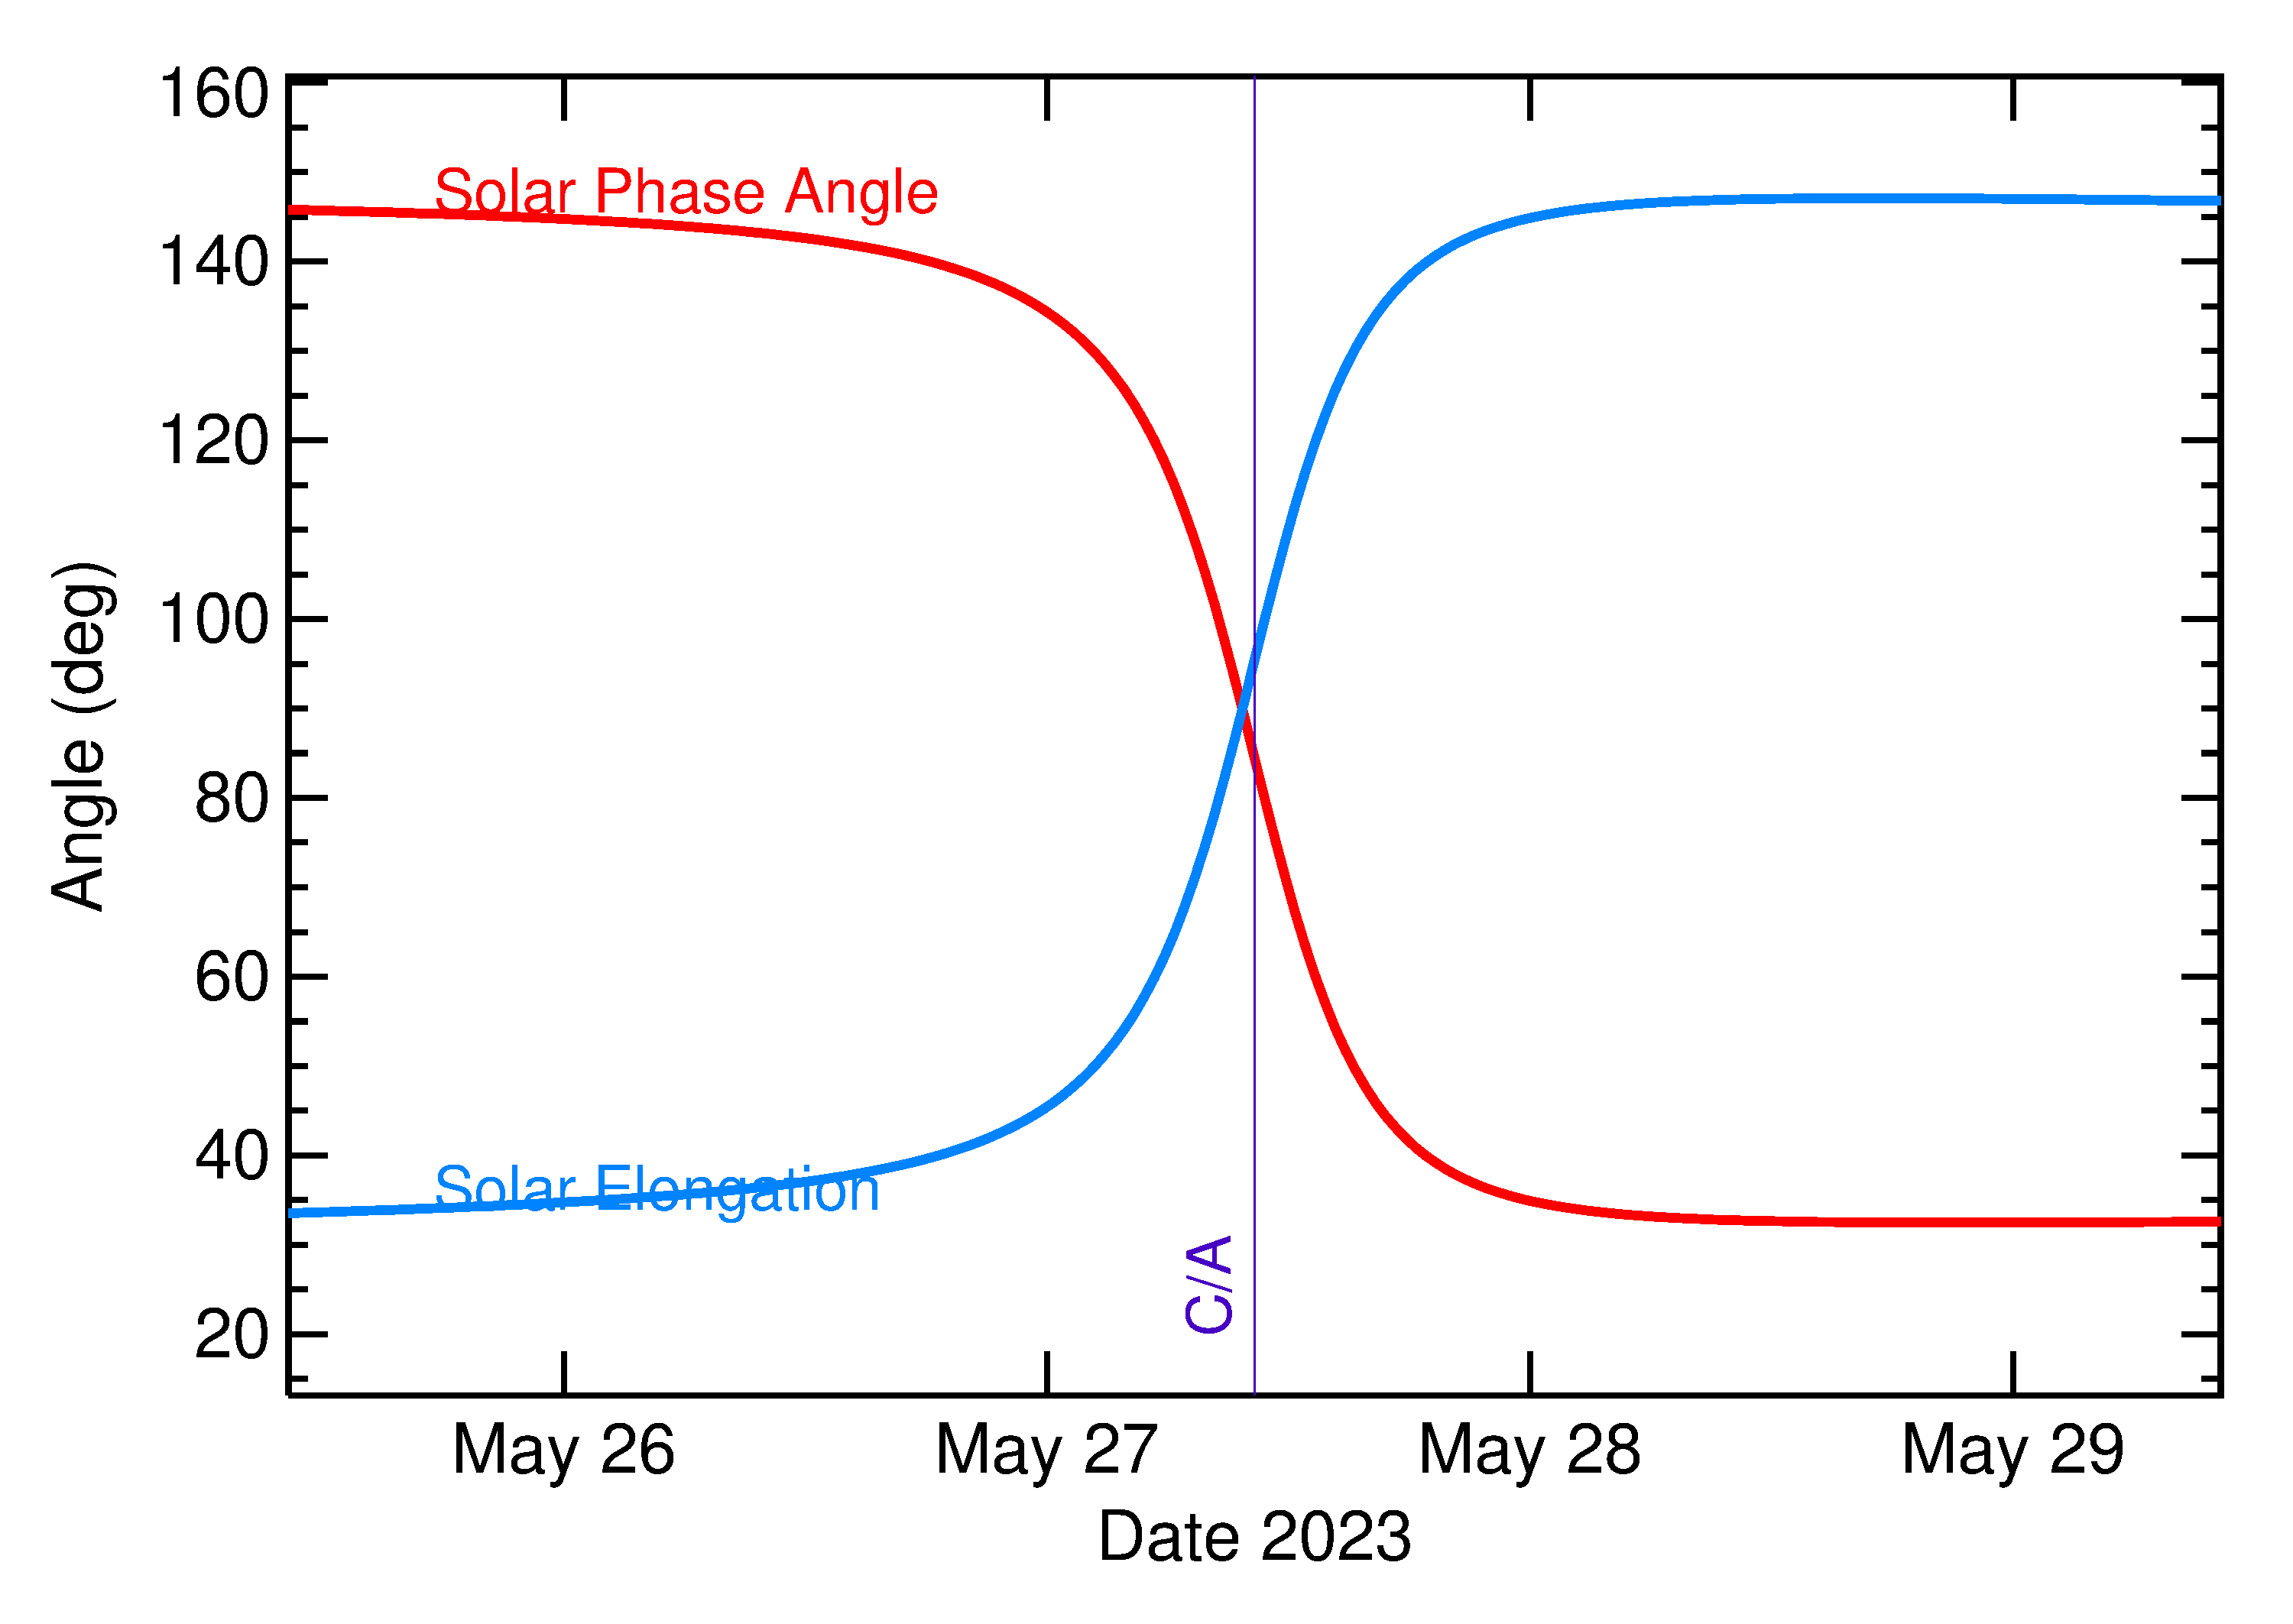 Solar Elongation and Solar Phase Angle of 2023 KK4 in the days around closest approach